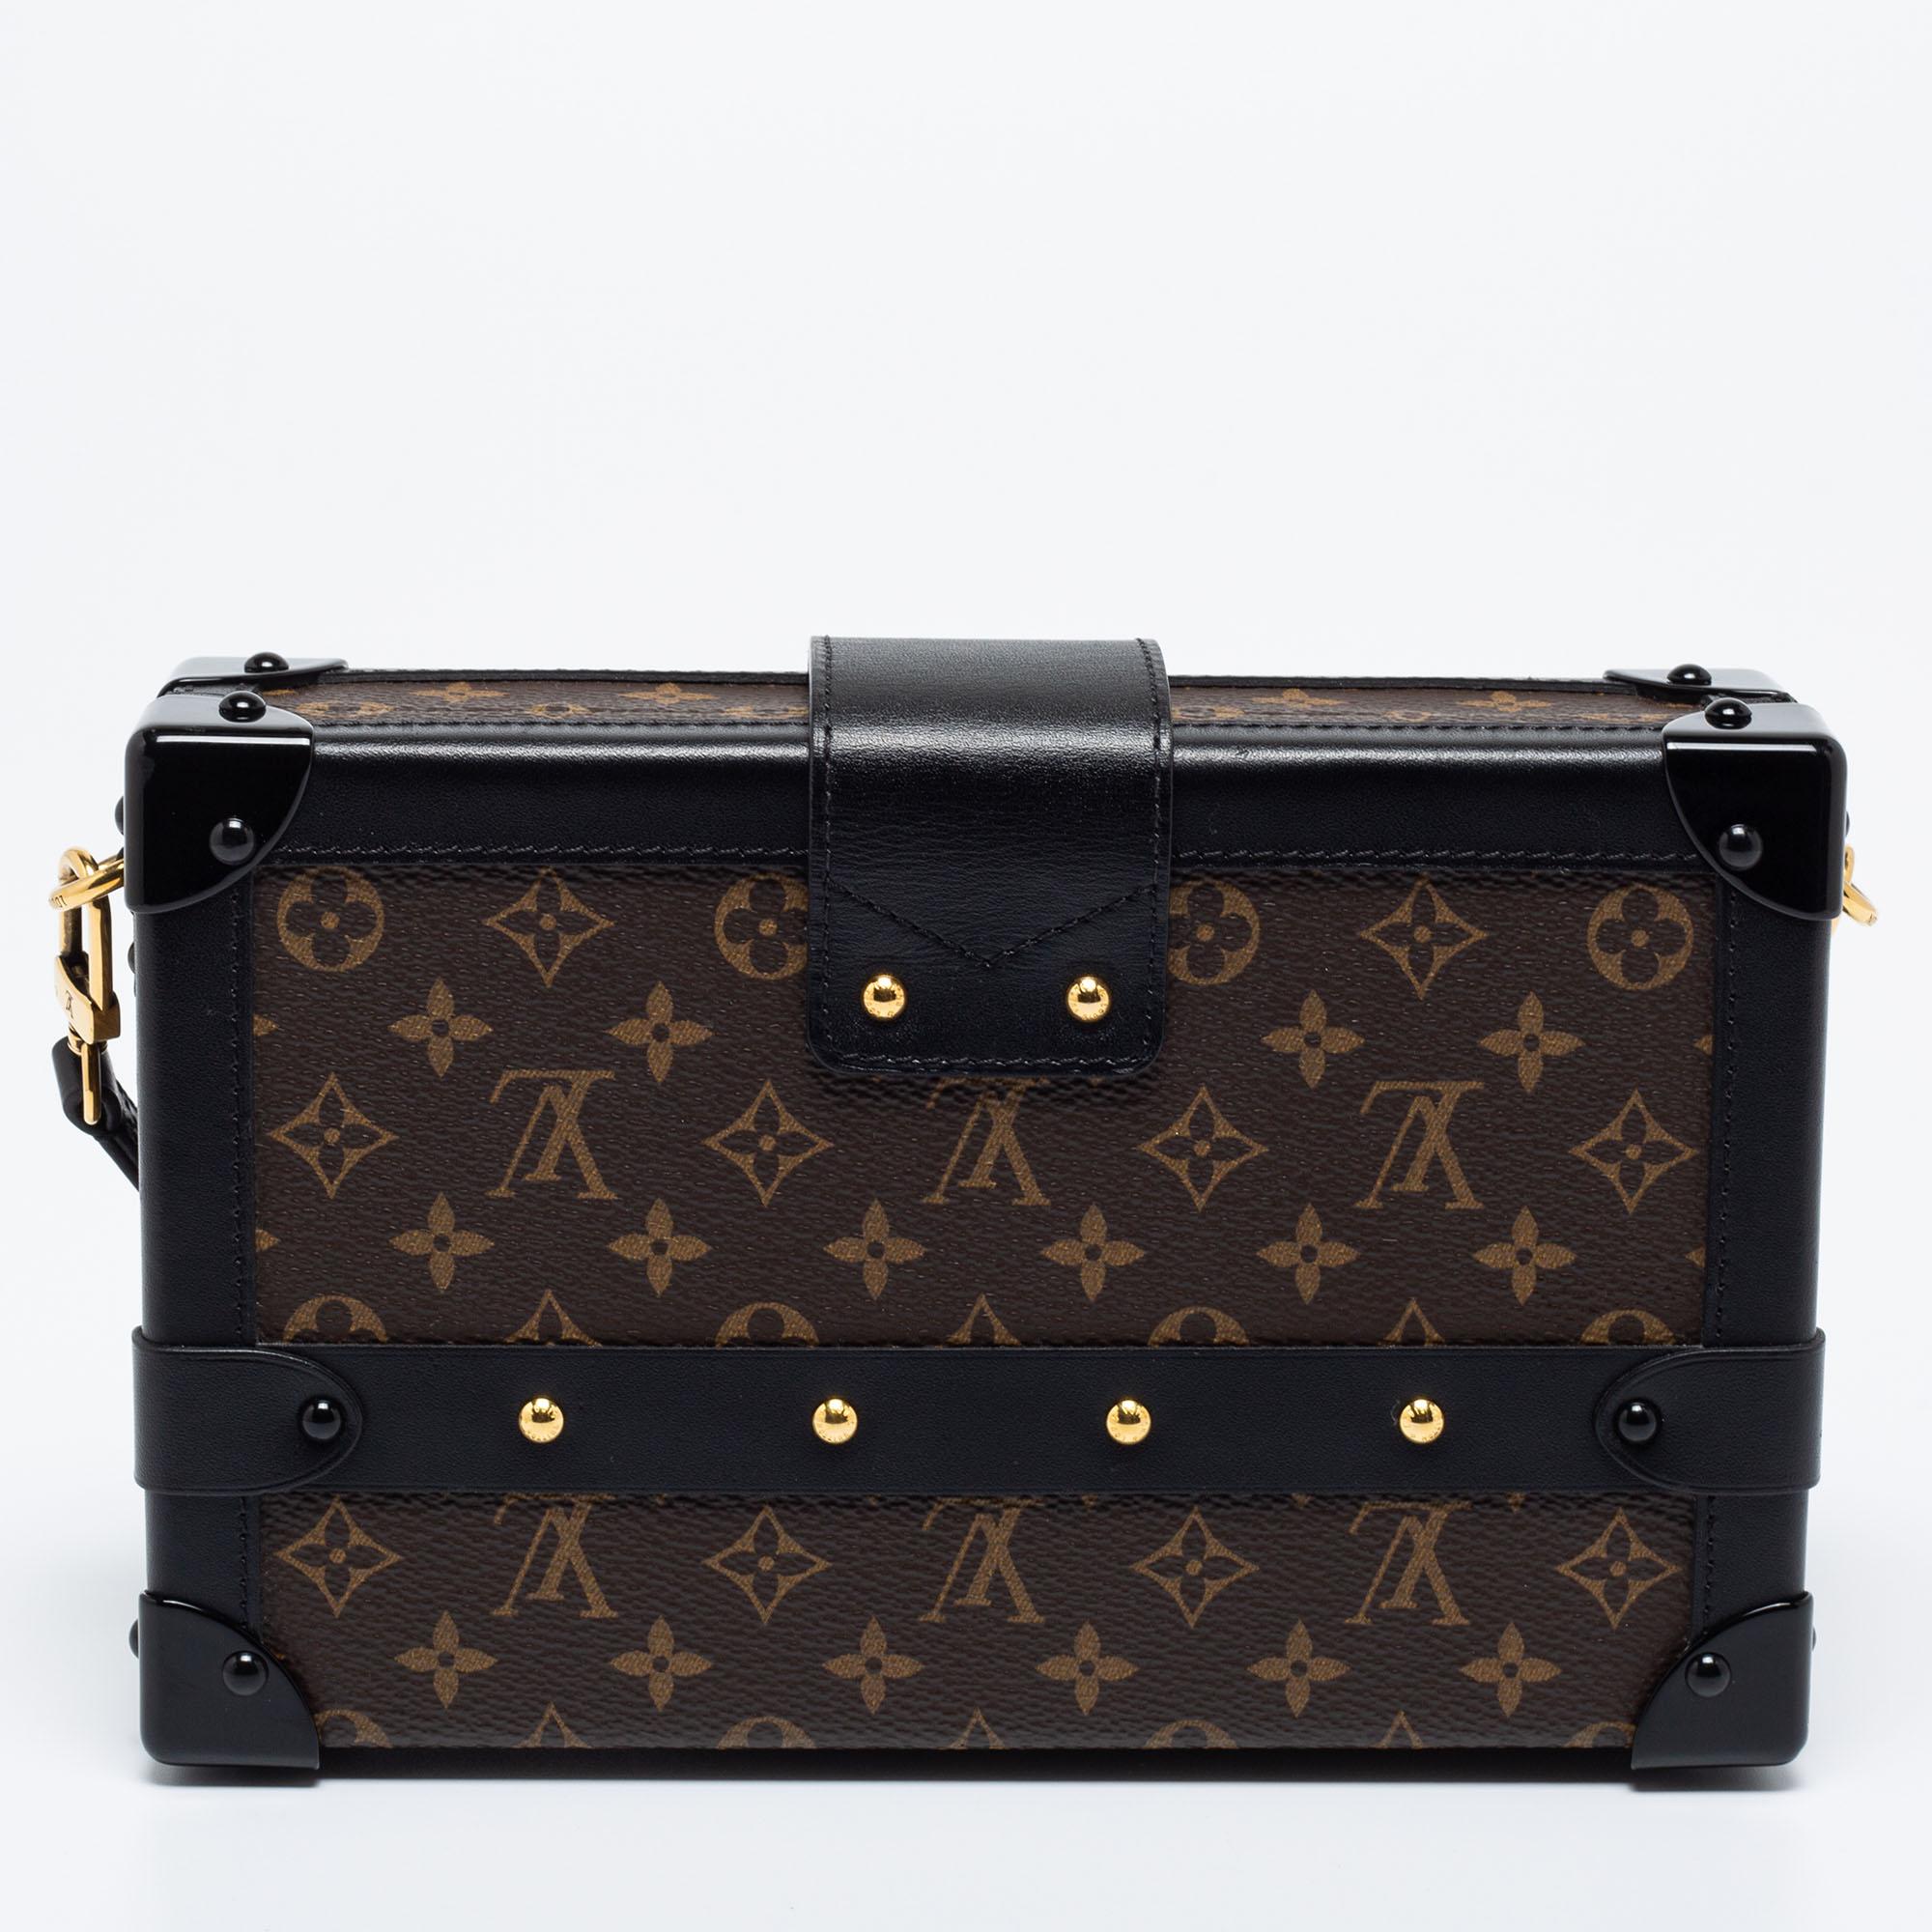 This Petite Malle bag from the House of Louis Vuitton brings you endless style, comfort, and luxury. It is crafted using Monogram canvas and displays gold-tone embellishments, a leather-lined interior, and leather trims. Its shape is complemented by